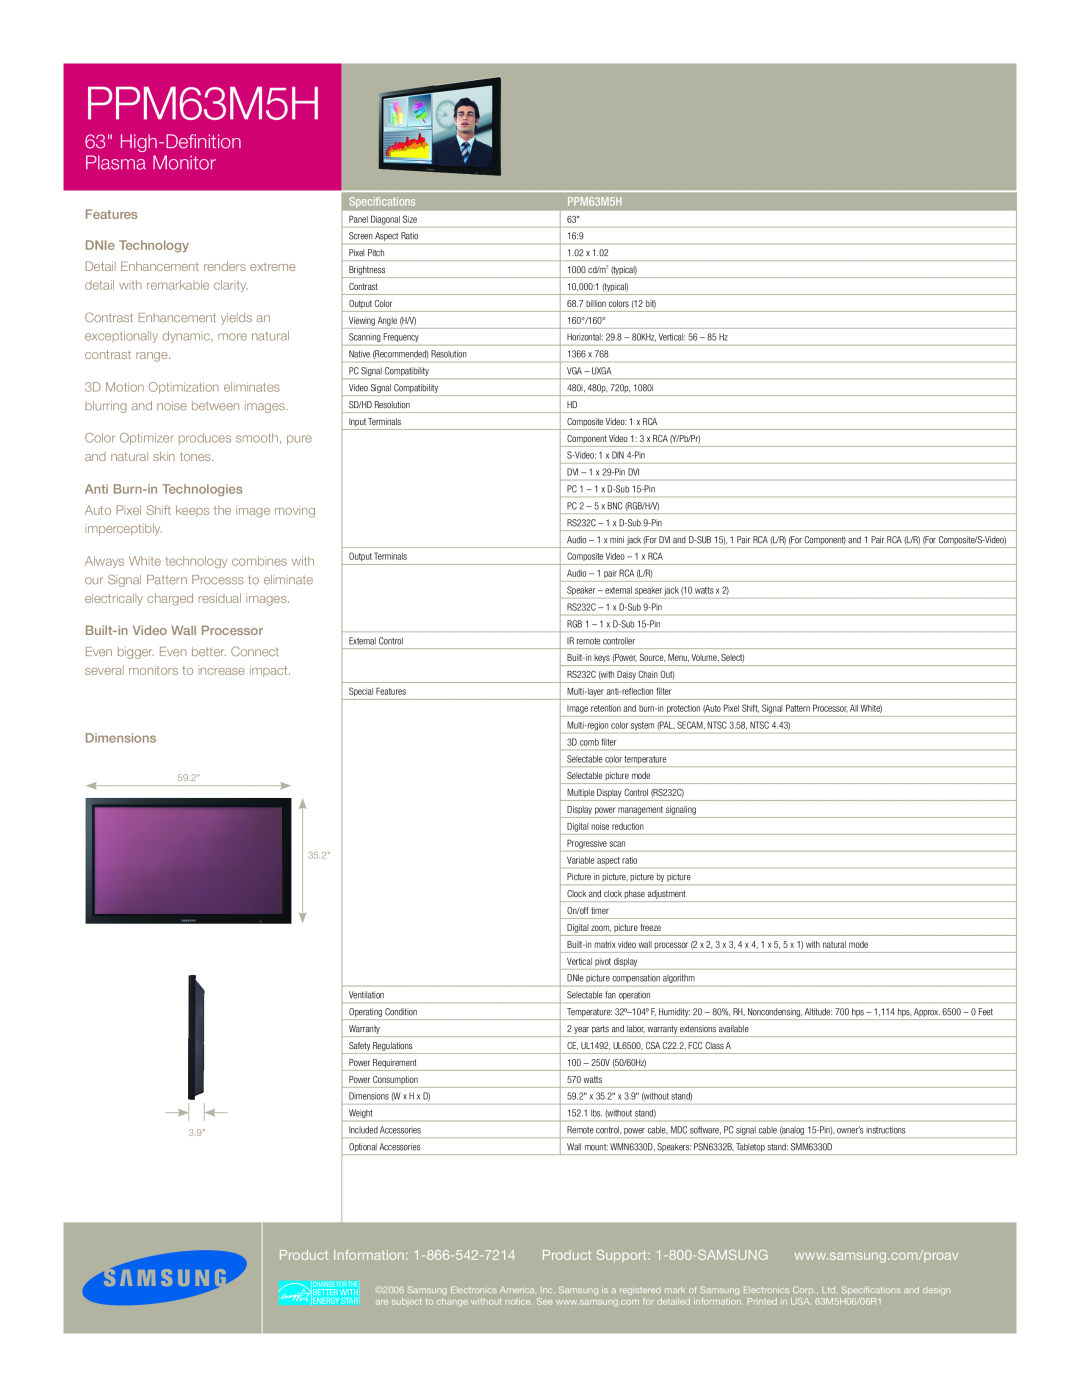 Samsung PPM63M5H High-Definition Plasma Monitor, Product Information, Product Support 1-800-SAMSUNG, Dimensions, 59.2 35.2 